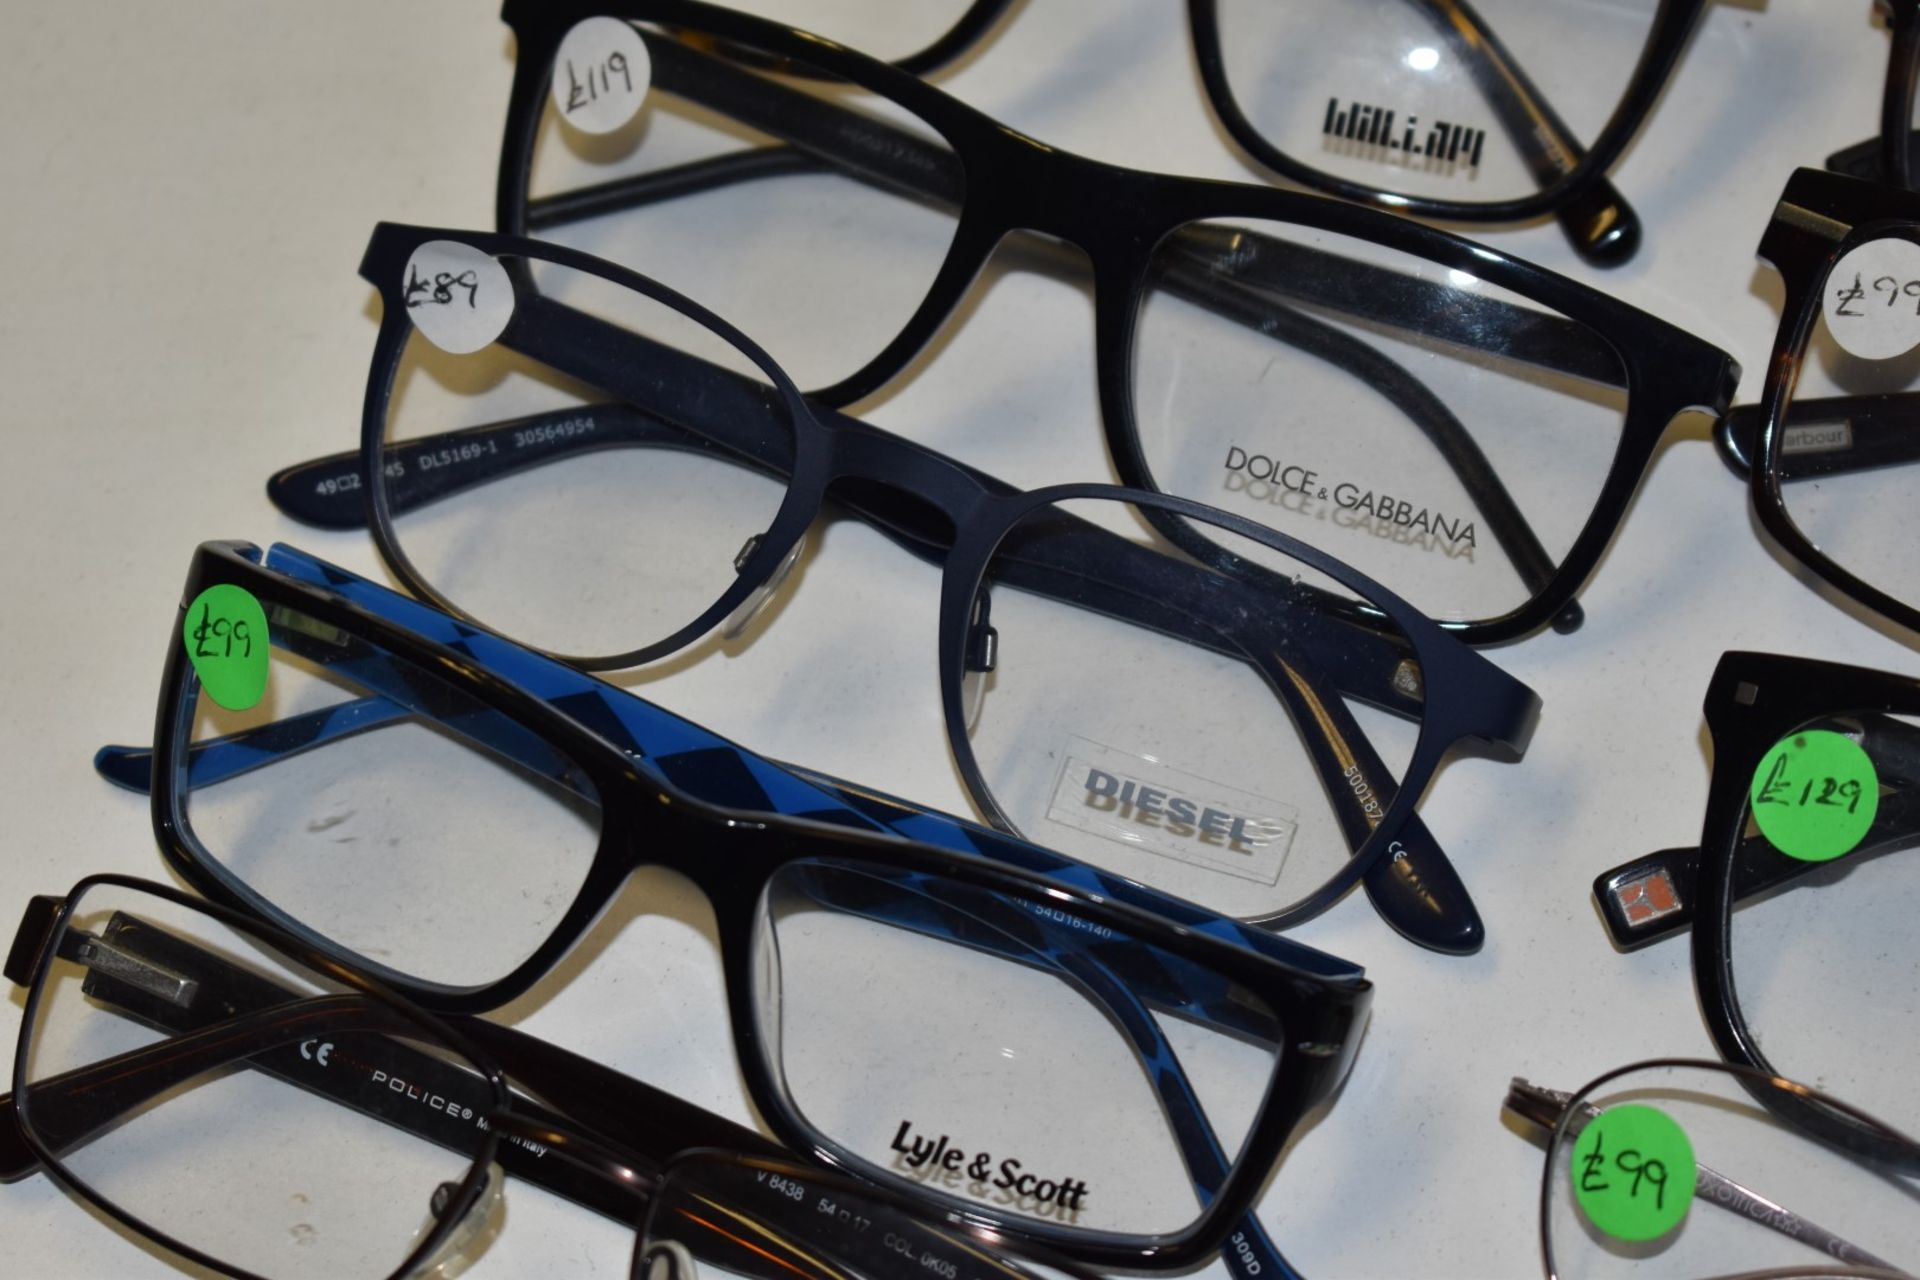 10 x Assorted Pairs of Designer Spectacle Eye Glasses - Ex Display Stock - Brands Include Dolce & - Image 3 of 10